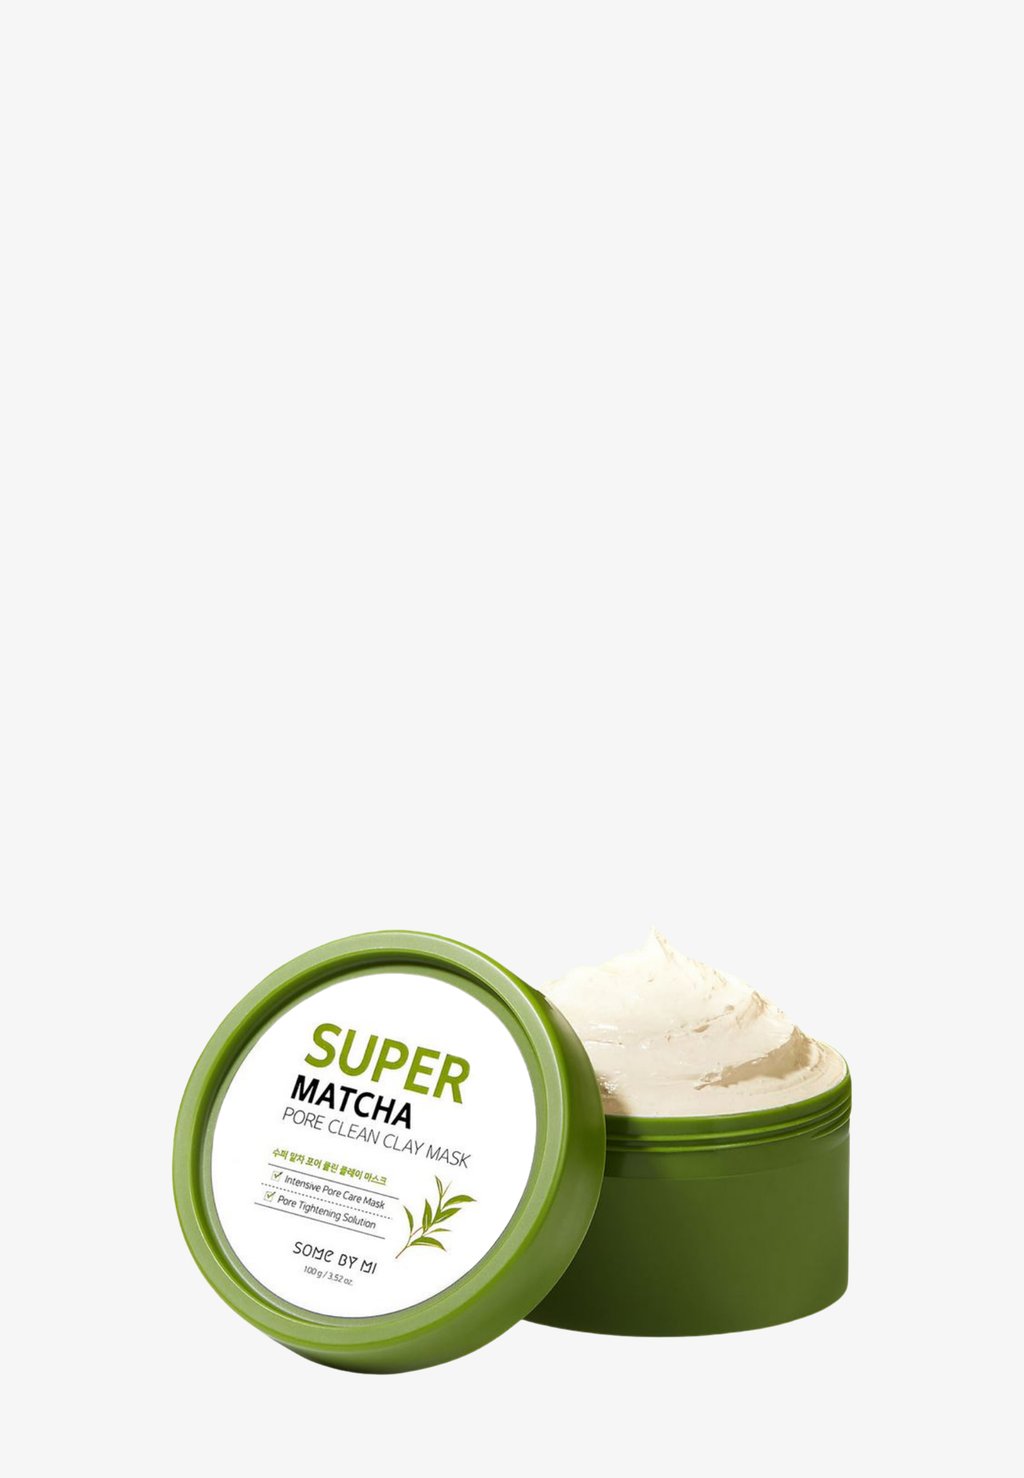 Маска для лица Super Matcha Pore Clean Clay Mask SOME BY MI some by mi маска для лица super matcha pore clean clay mask 100мг